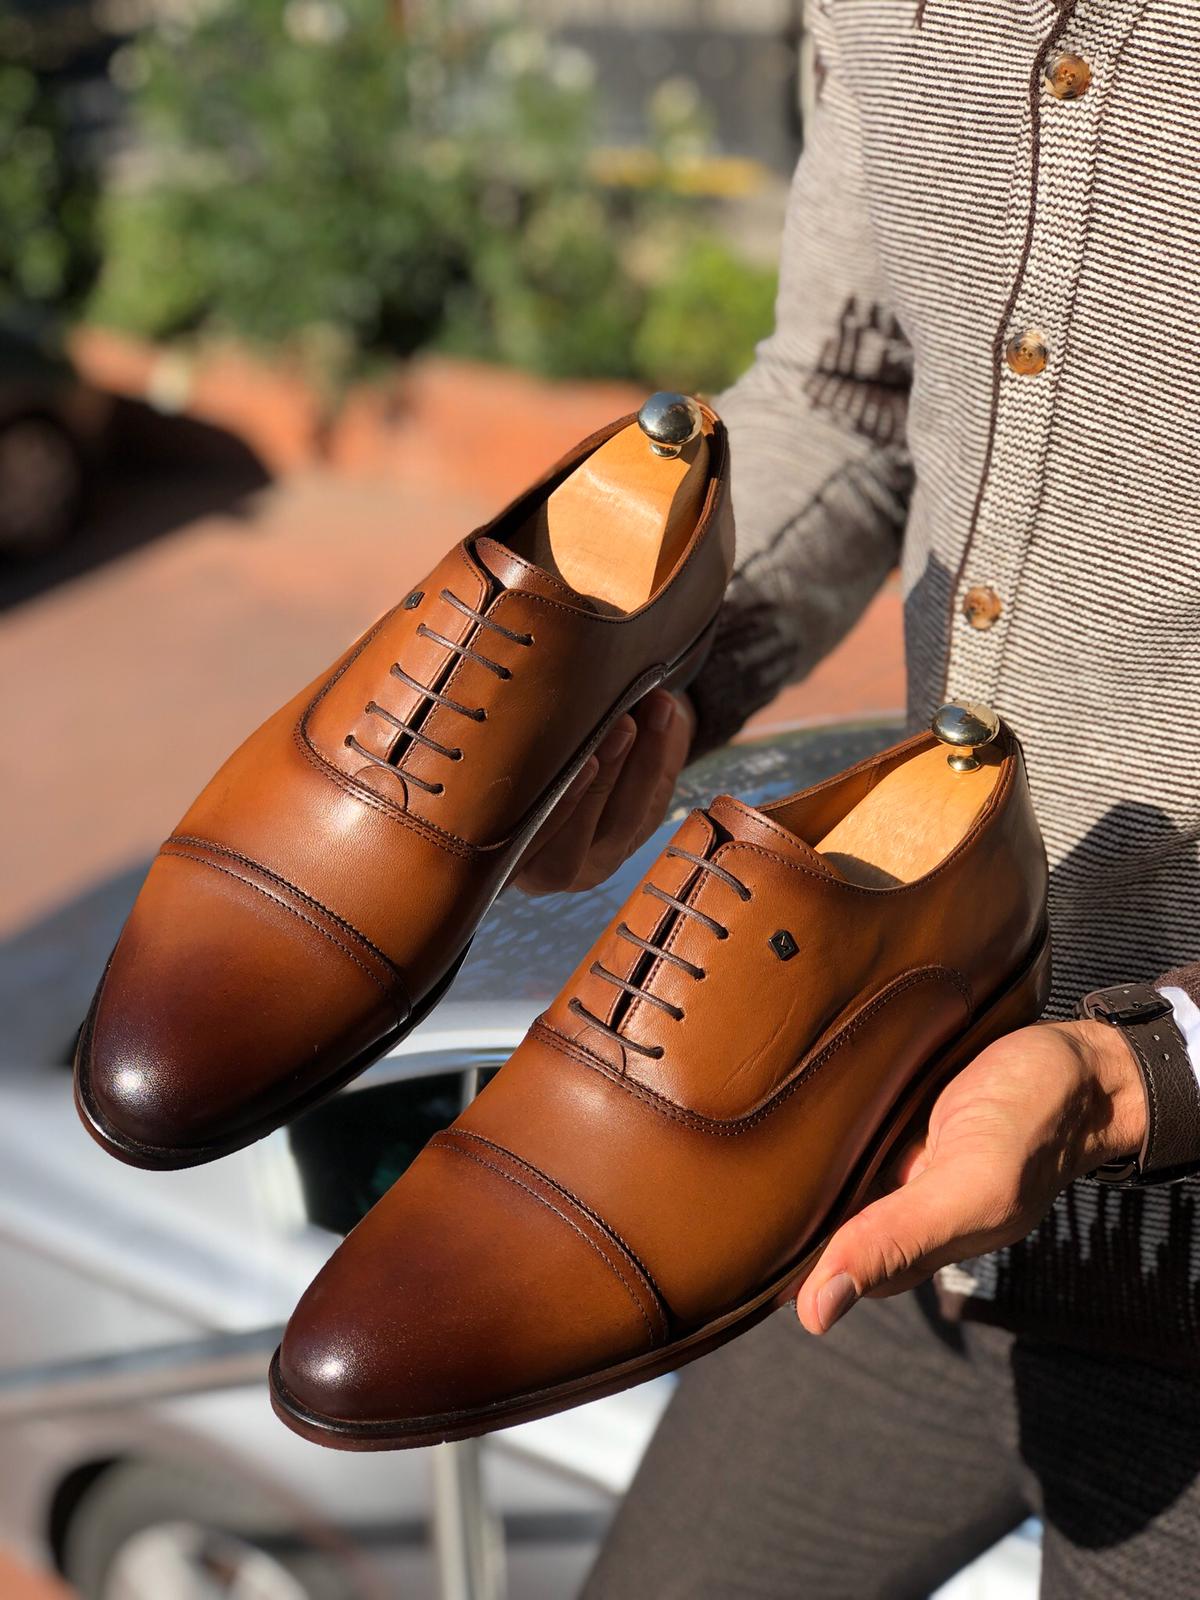 TAN CLASSIC LACED LEATHER SHOES